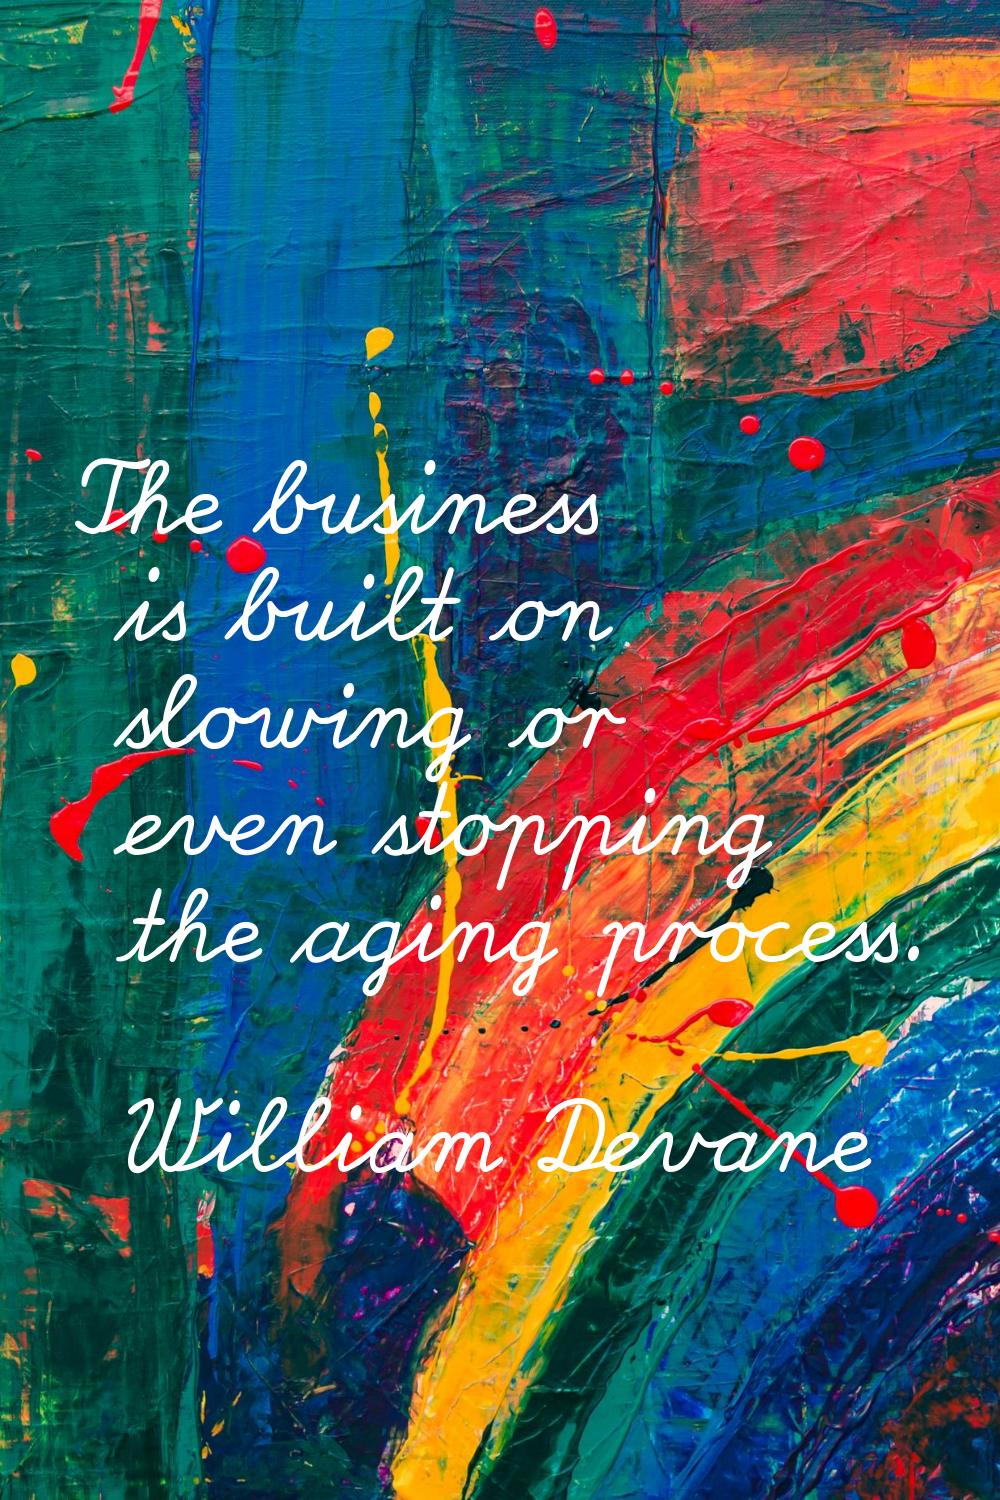 The business is built on slowing or even stopping the aging process.